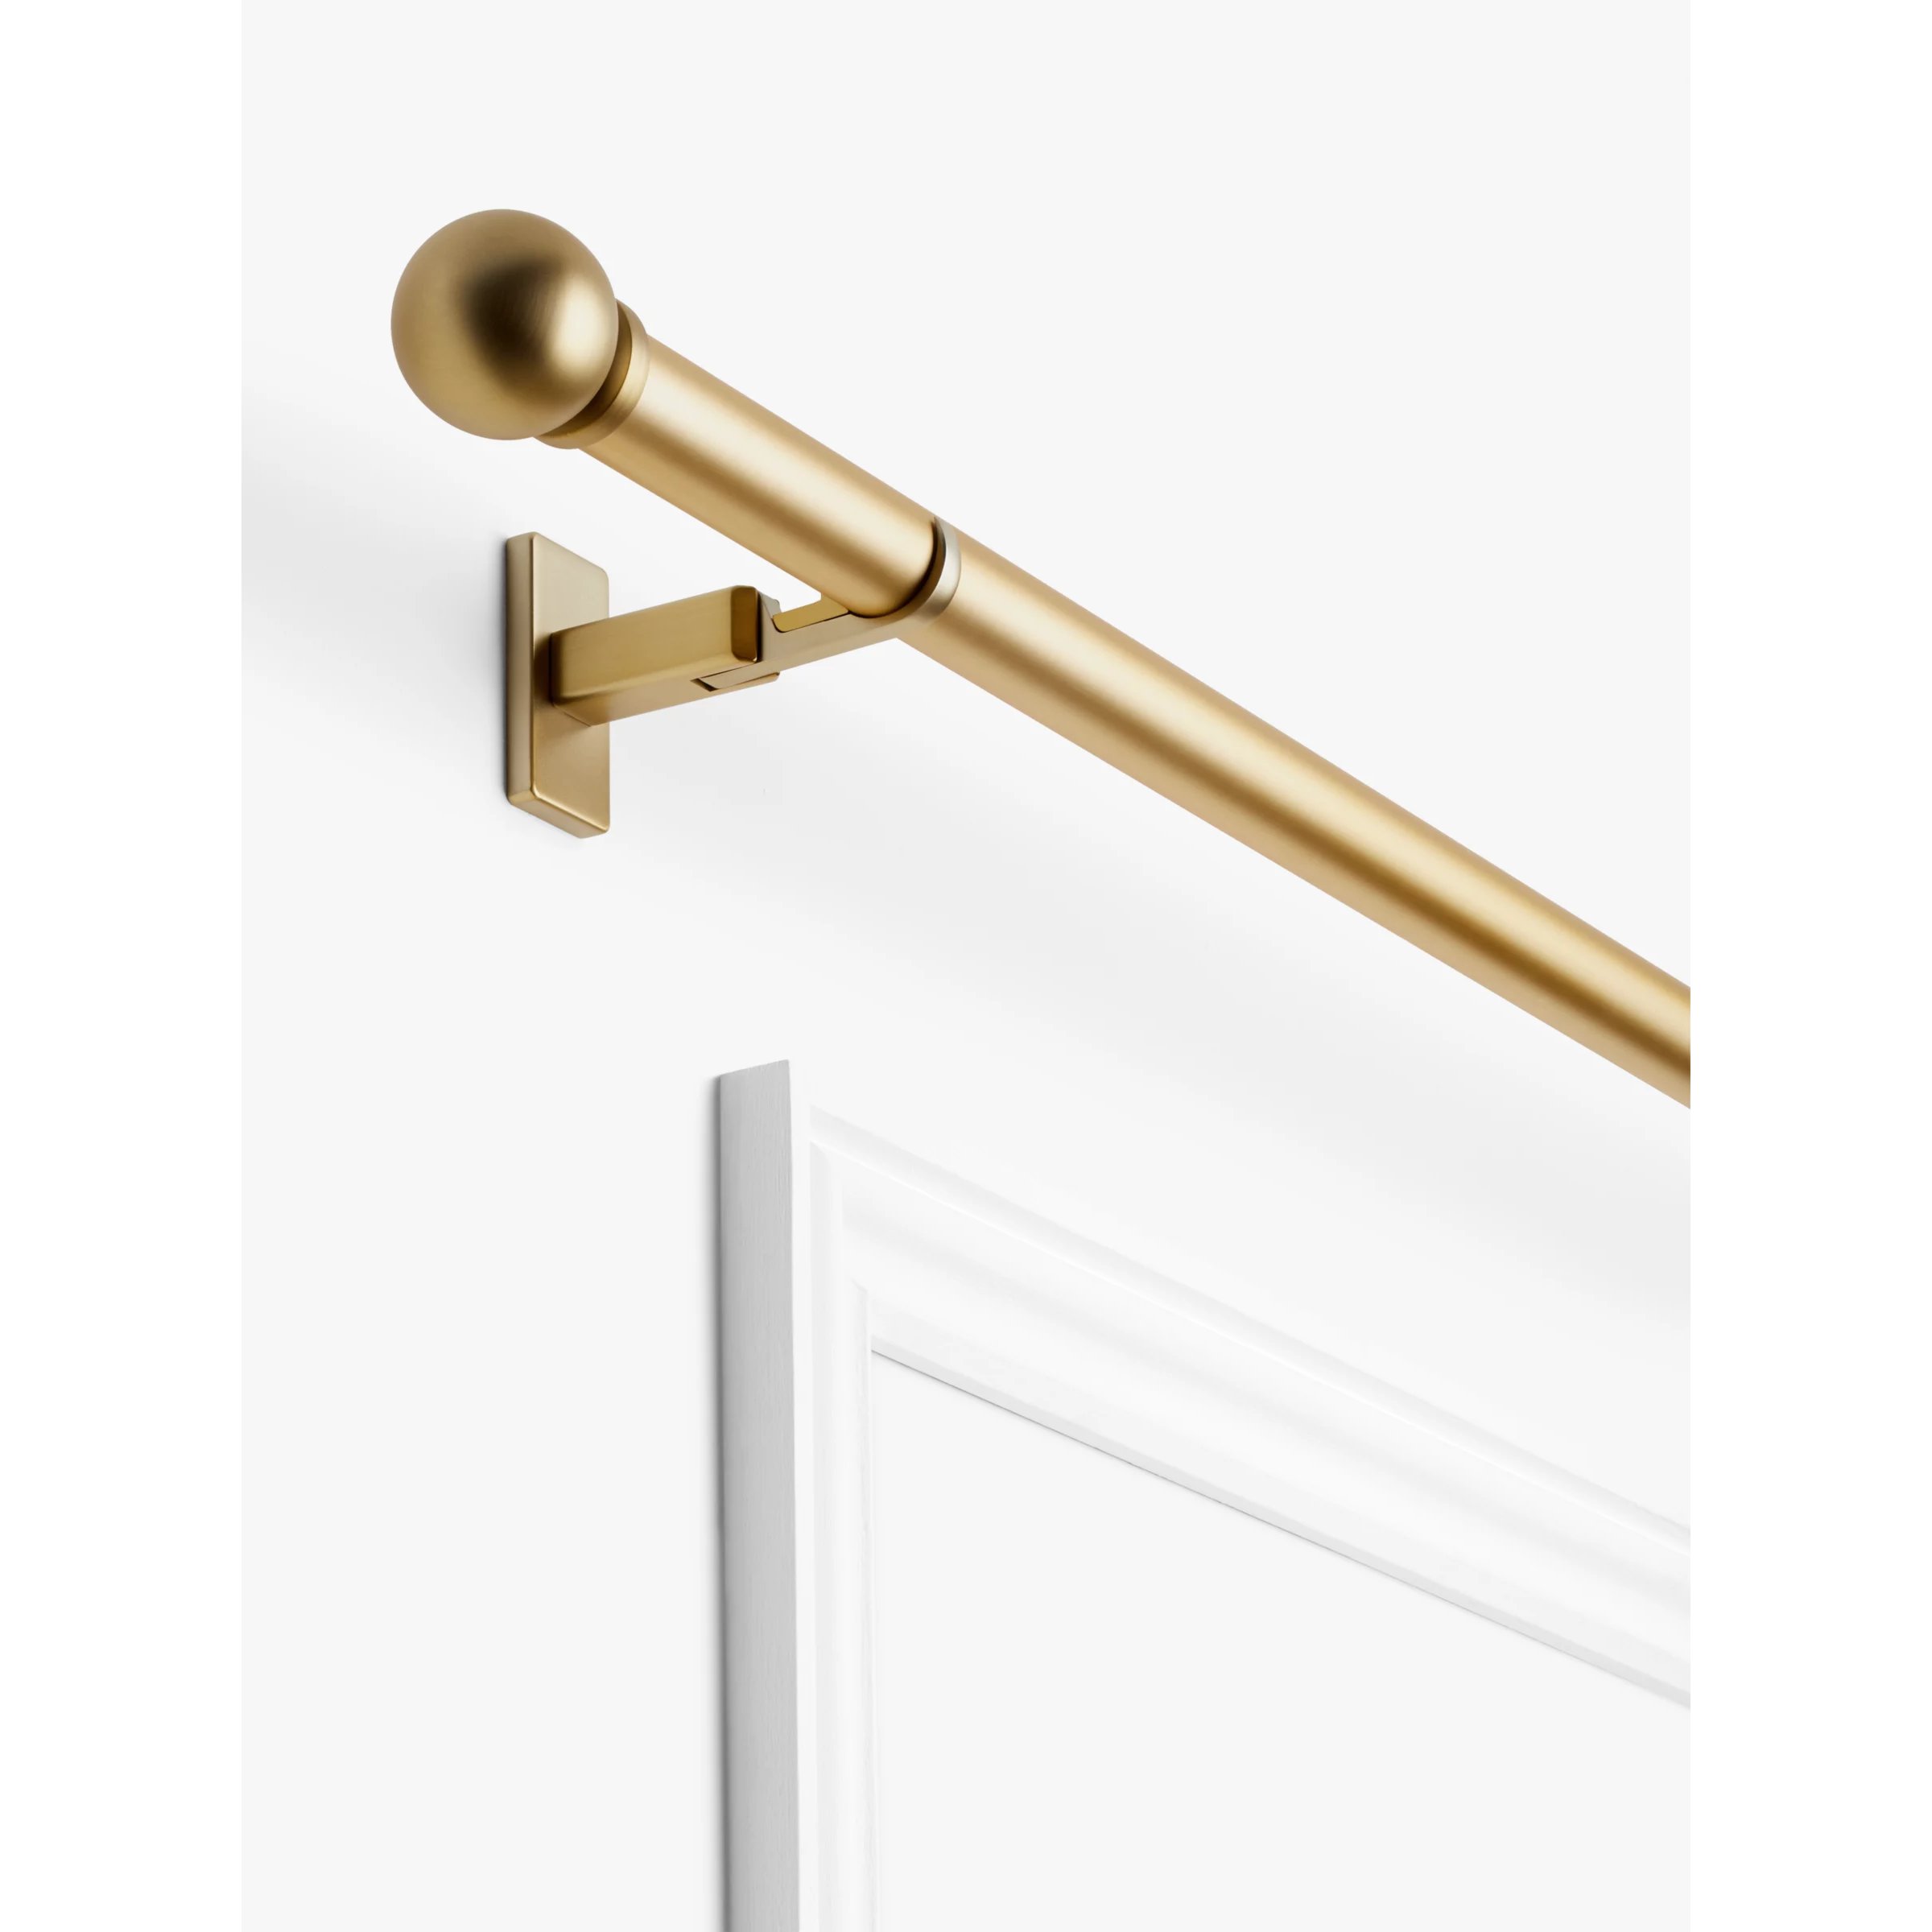 John Lewis & Partners Made to Measure Revolution Eyelet Curtain Pole with Ball Finials, Wall / Ceiling Fix, Dia.30mm